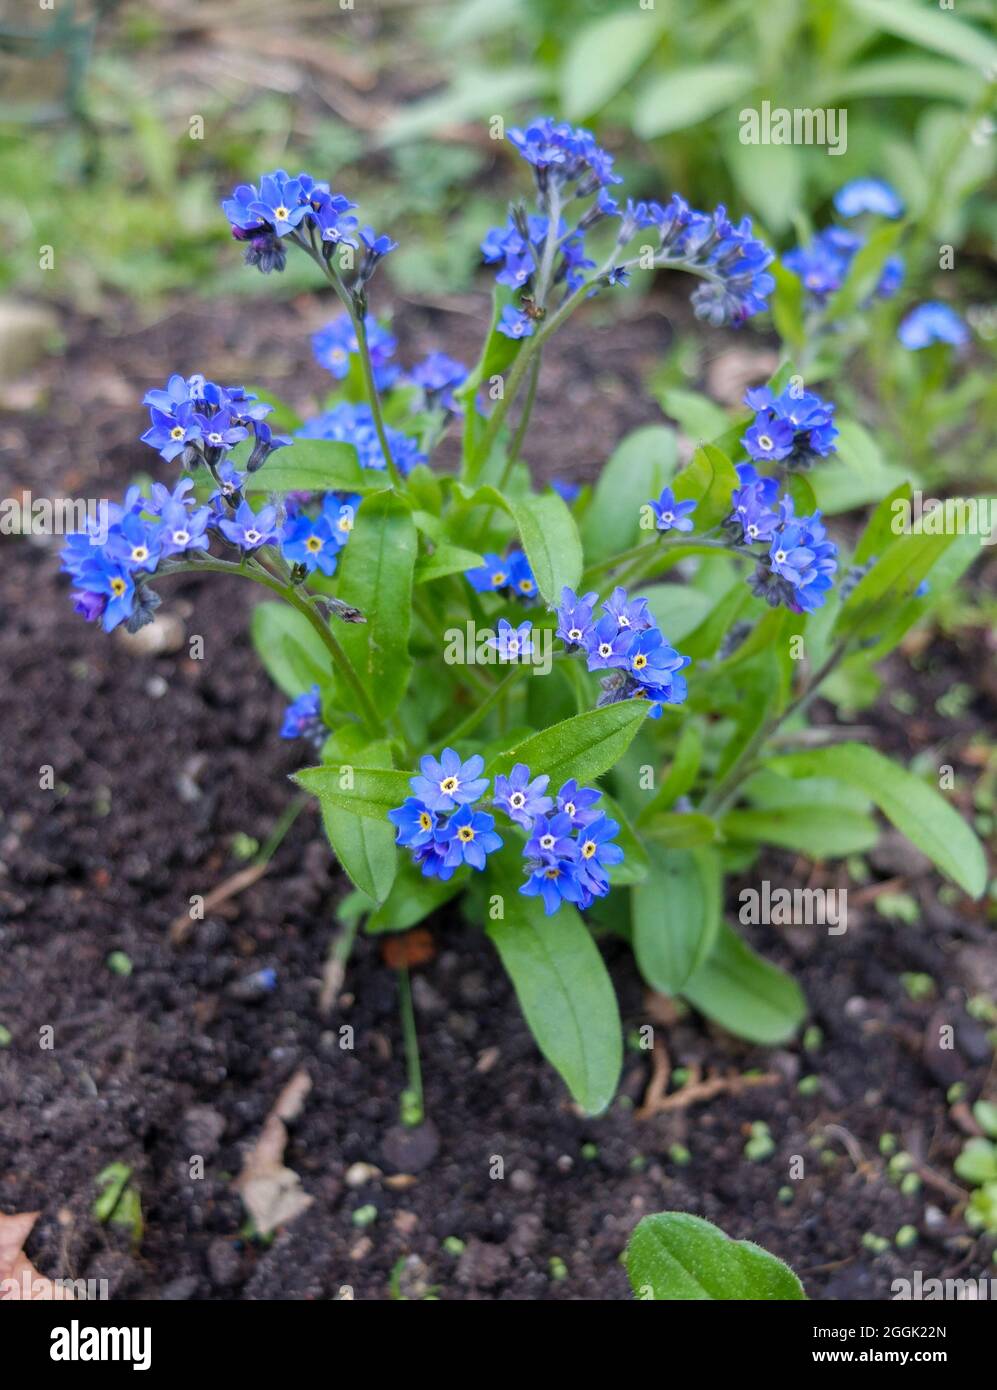 Forget-me-nots (Myosotis) in the bed Stock Photo